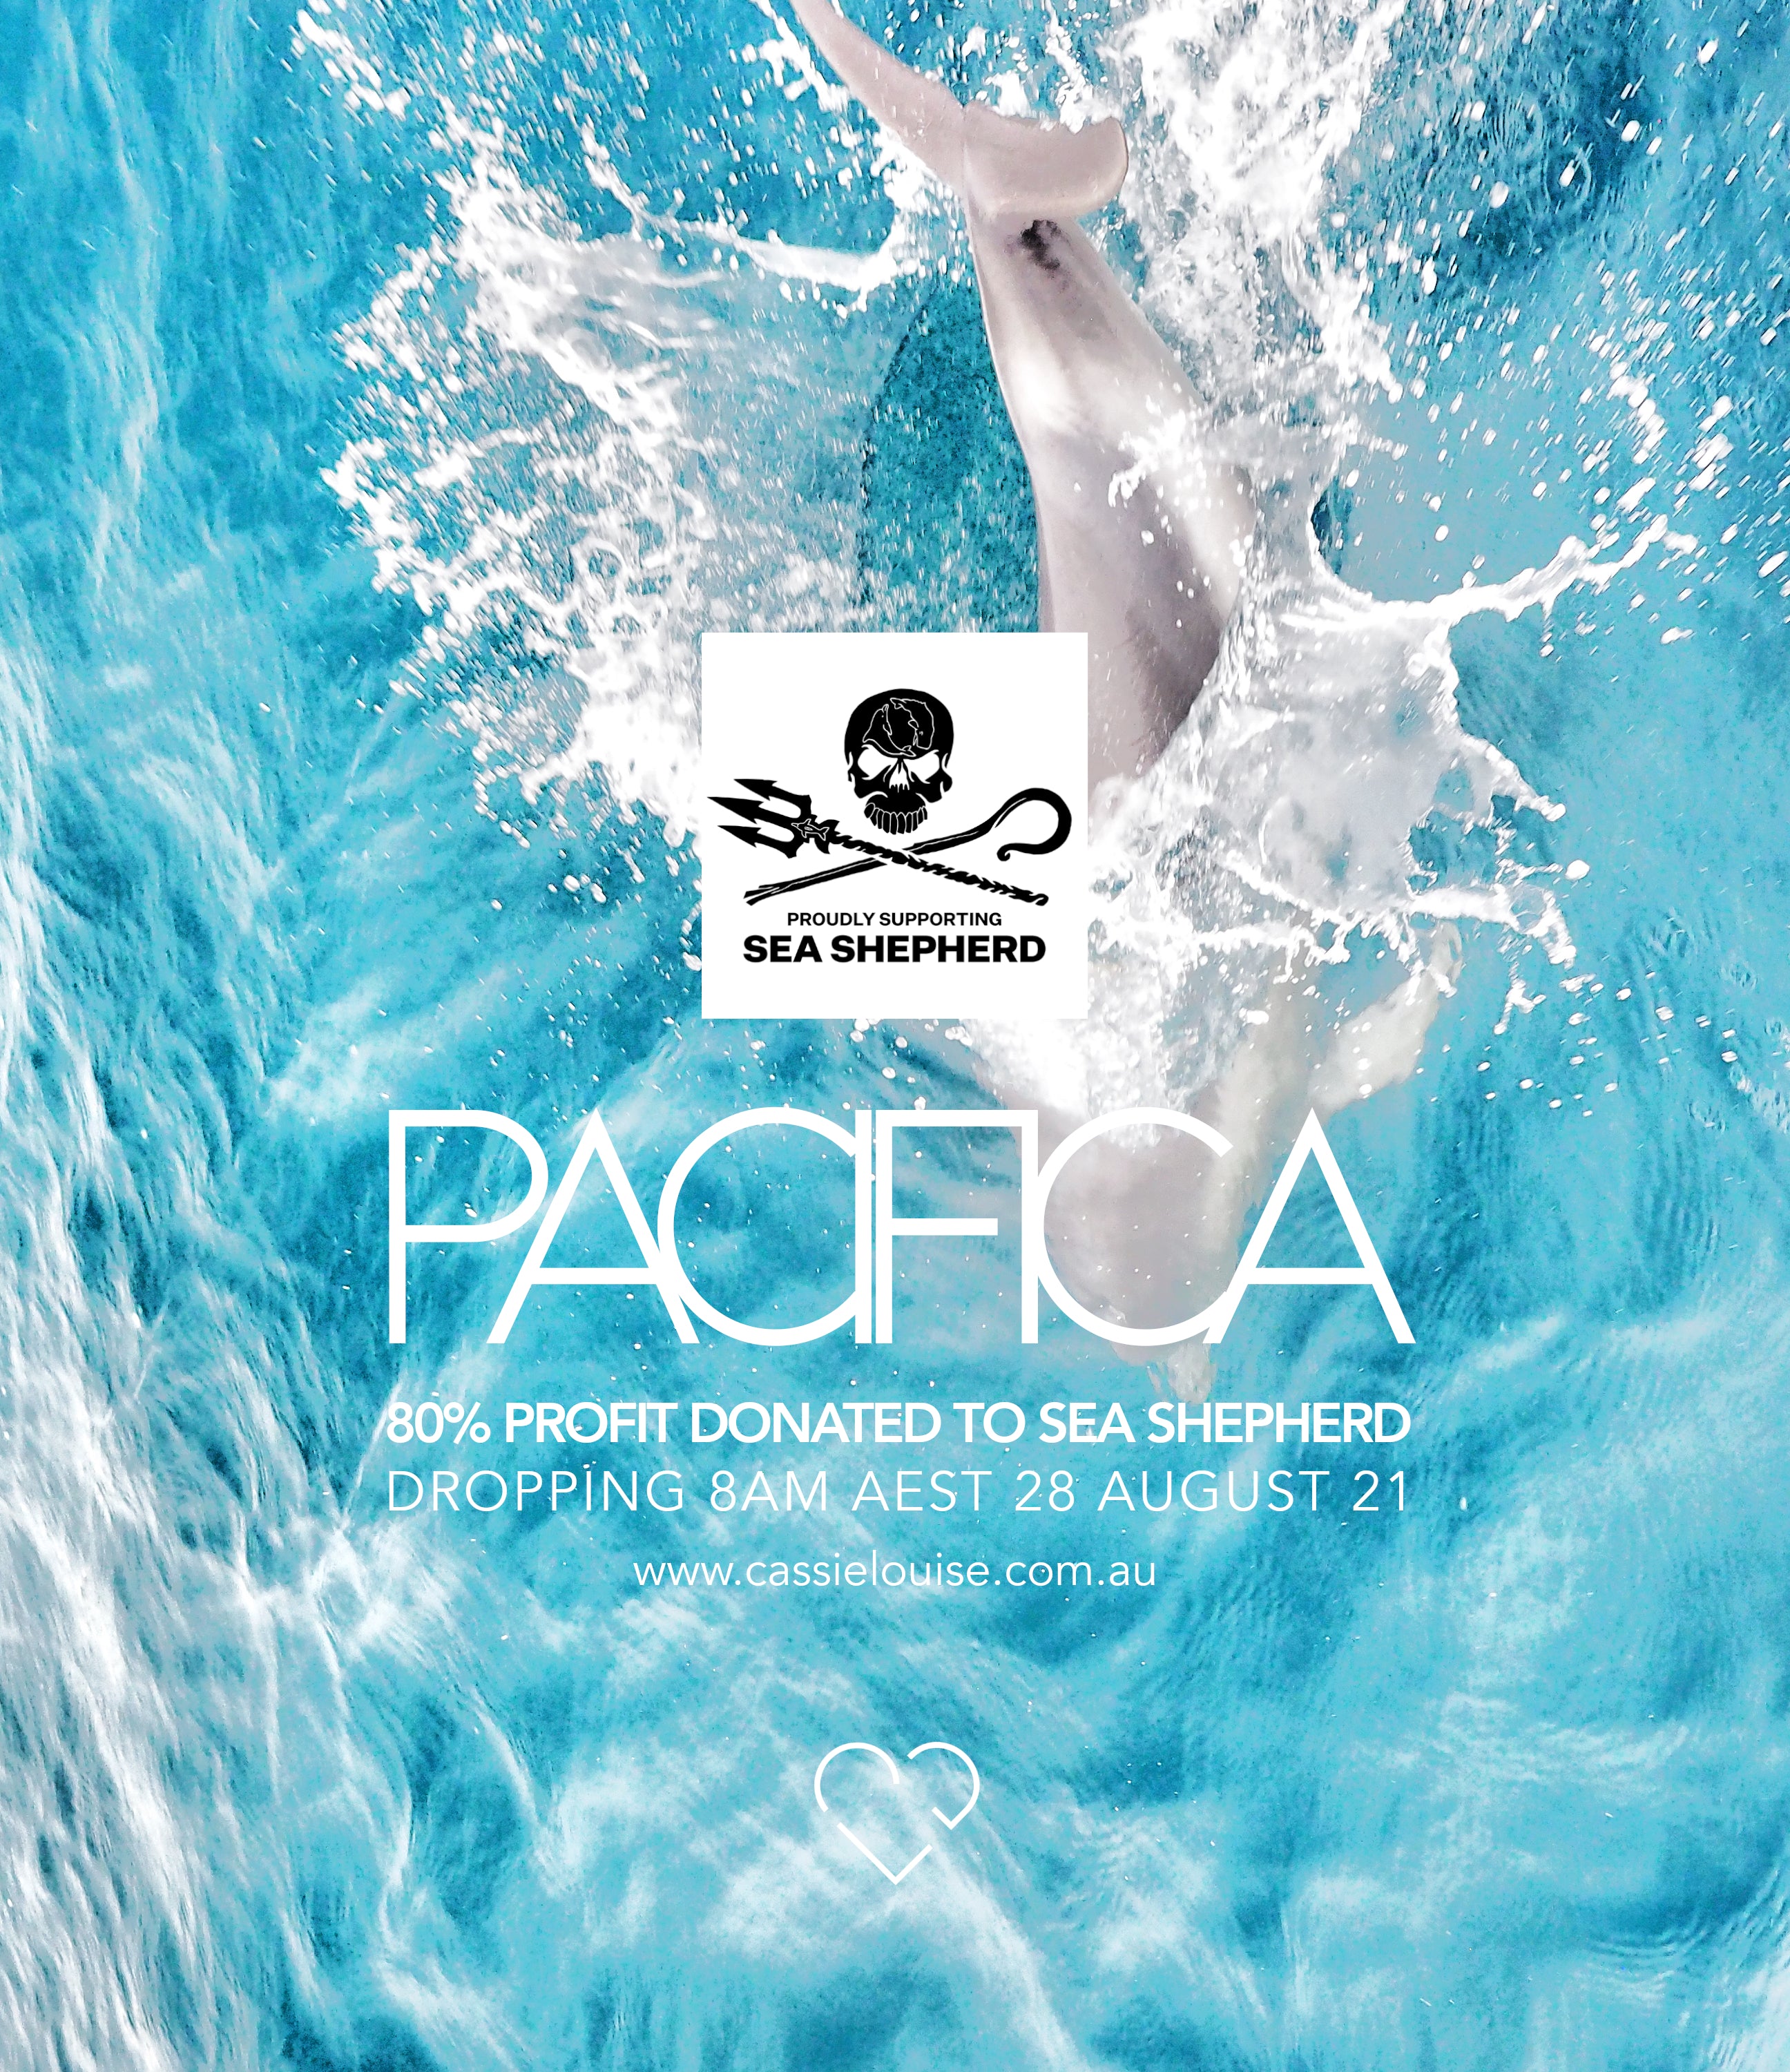 Cassie Louise Designs PACIFICA - Proudly Supporting Sea Shepherd